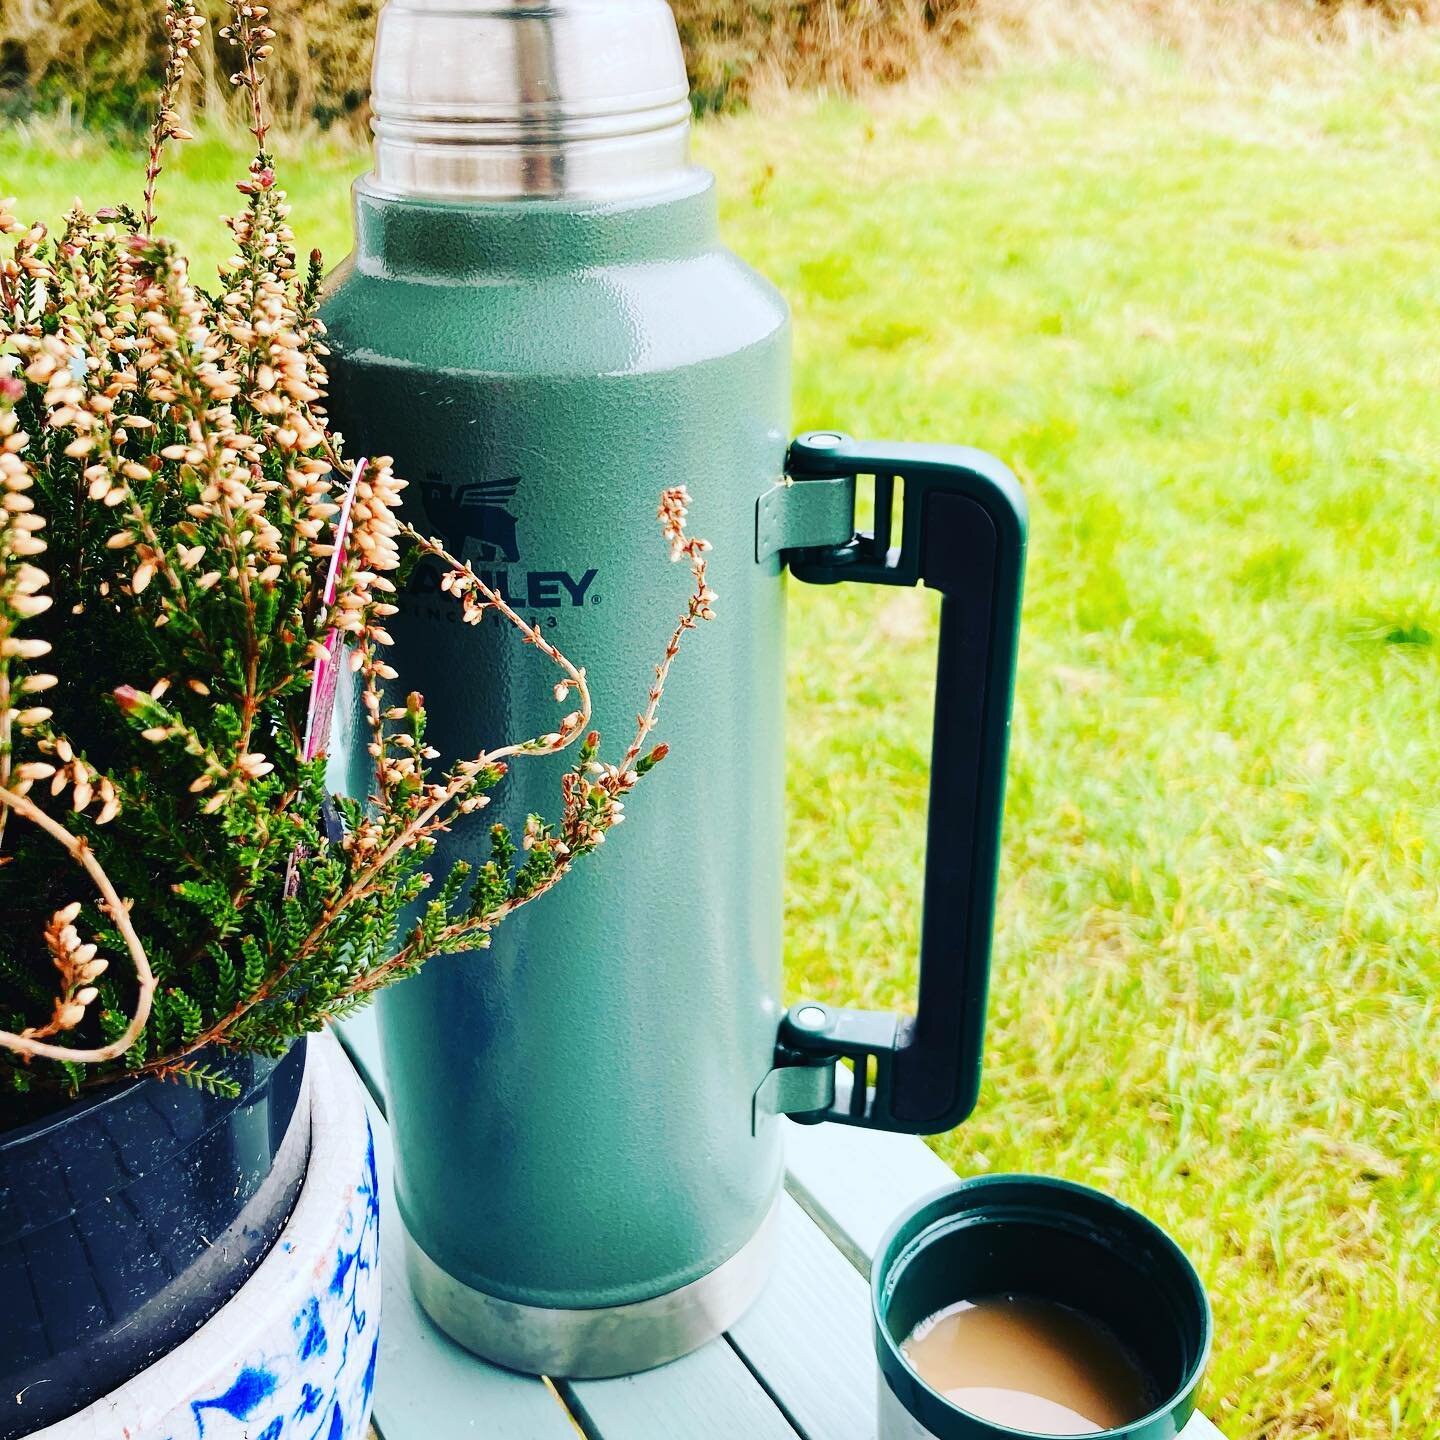 The taste of My childhood: Milky sweet tea in a flask 💓The gifts of Spring &amp; a new beginning have arrived at #thewillowretreat 
Wishing you wellness &amp; peace in your own self today &amp; always as we move forward in new fresh ways 

#healthyl